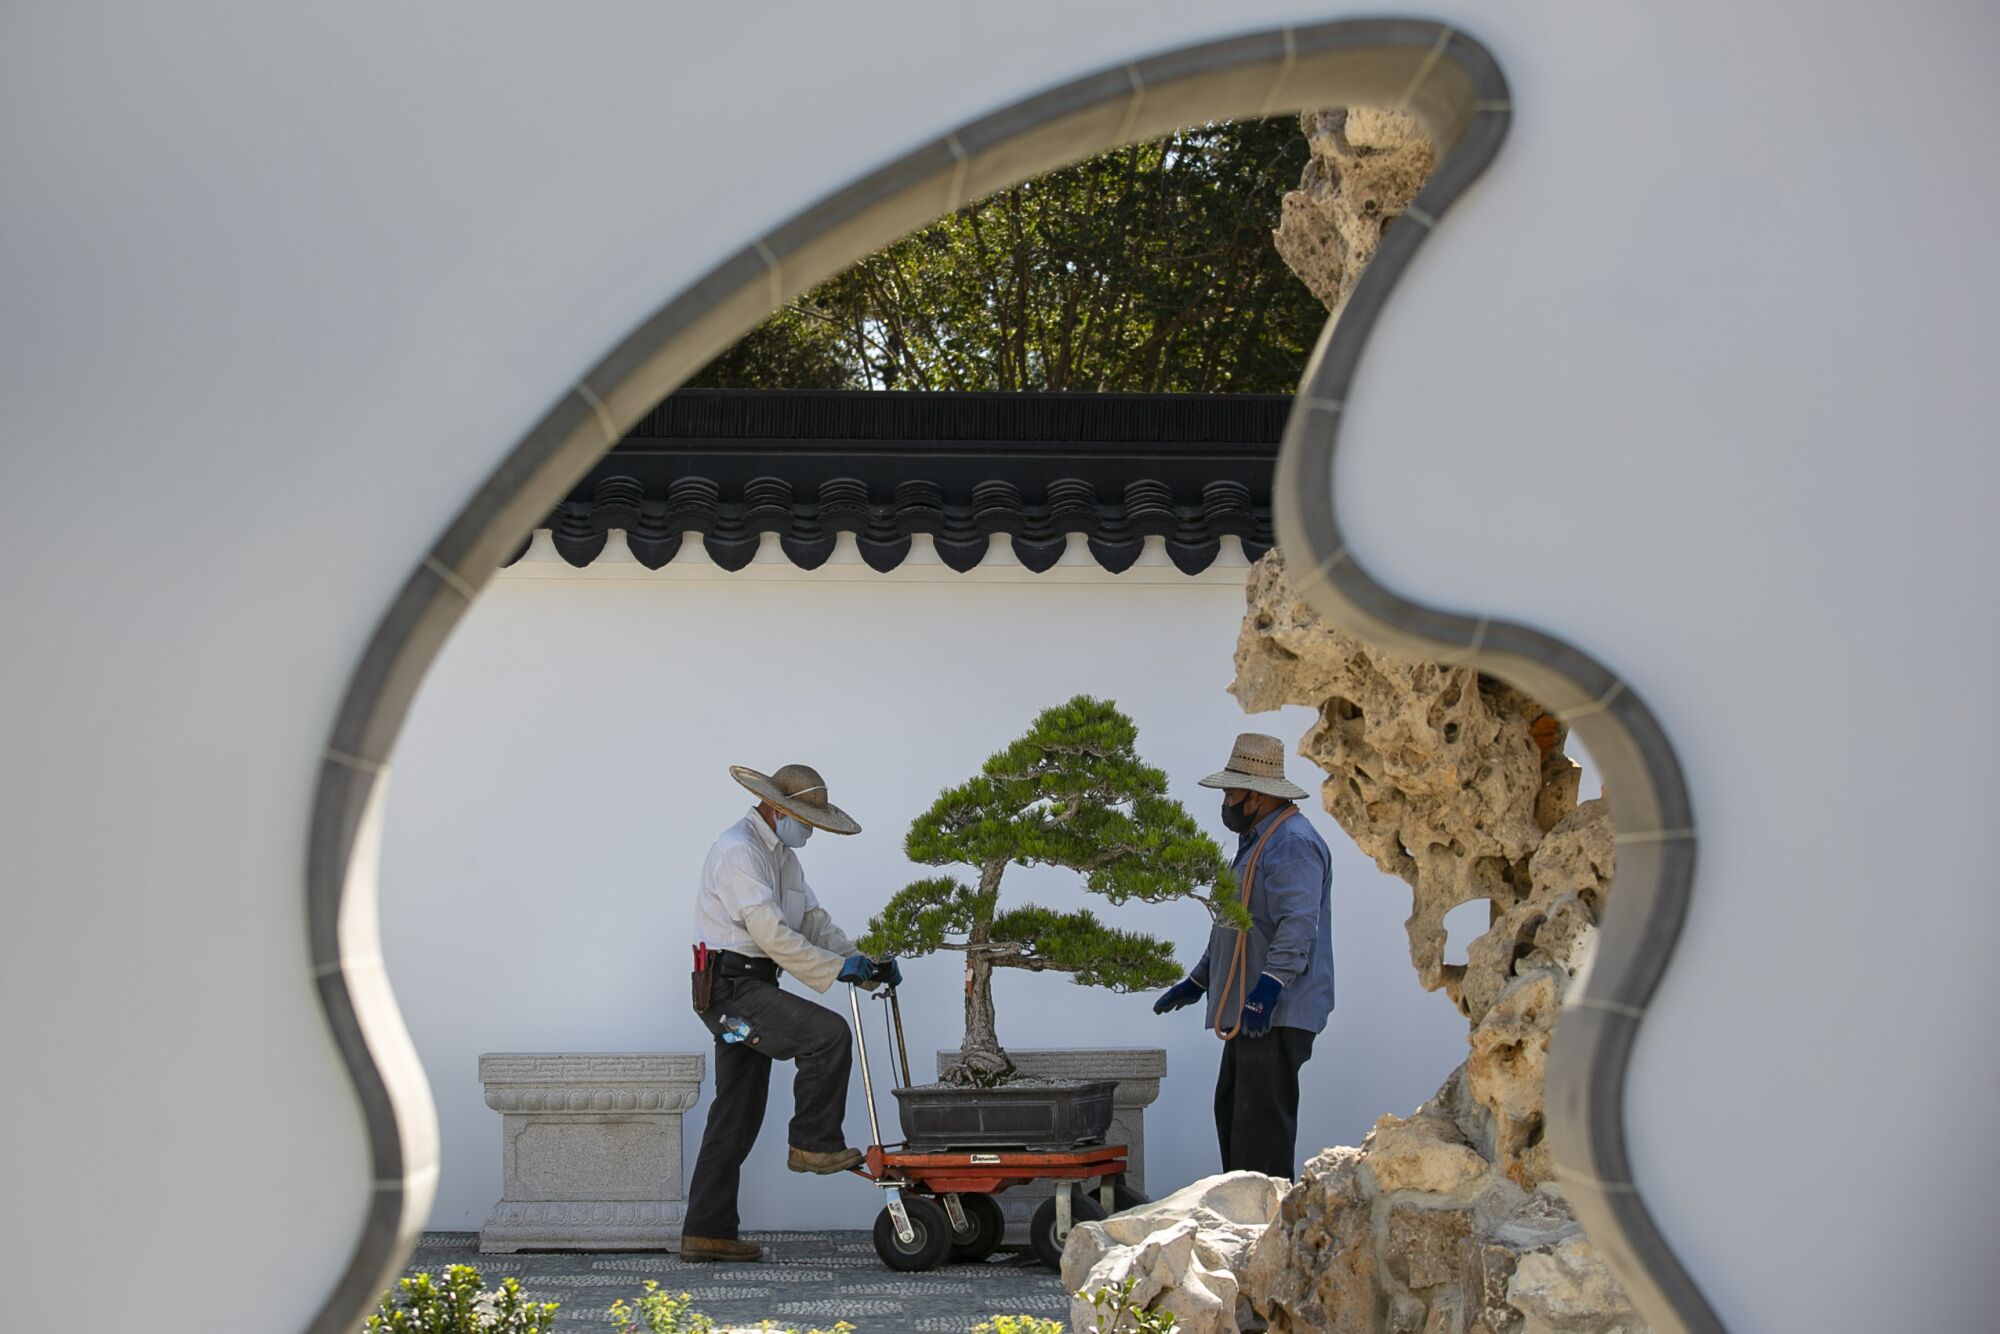 Che Zhao Sheng places a penjing on its stand in preparation for the Chinese Garden expansion's opening.